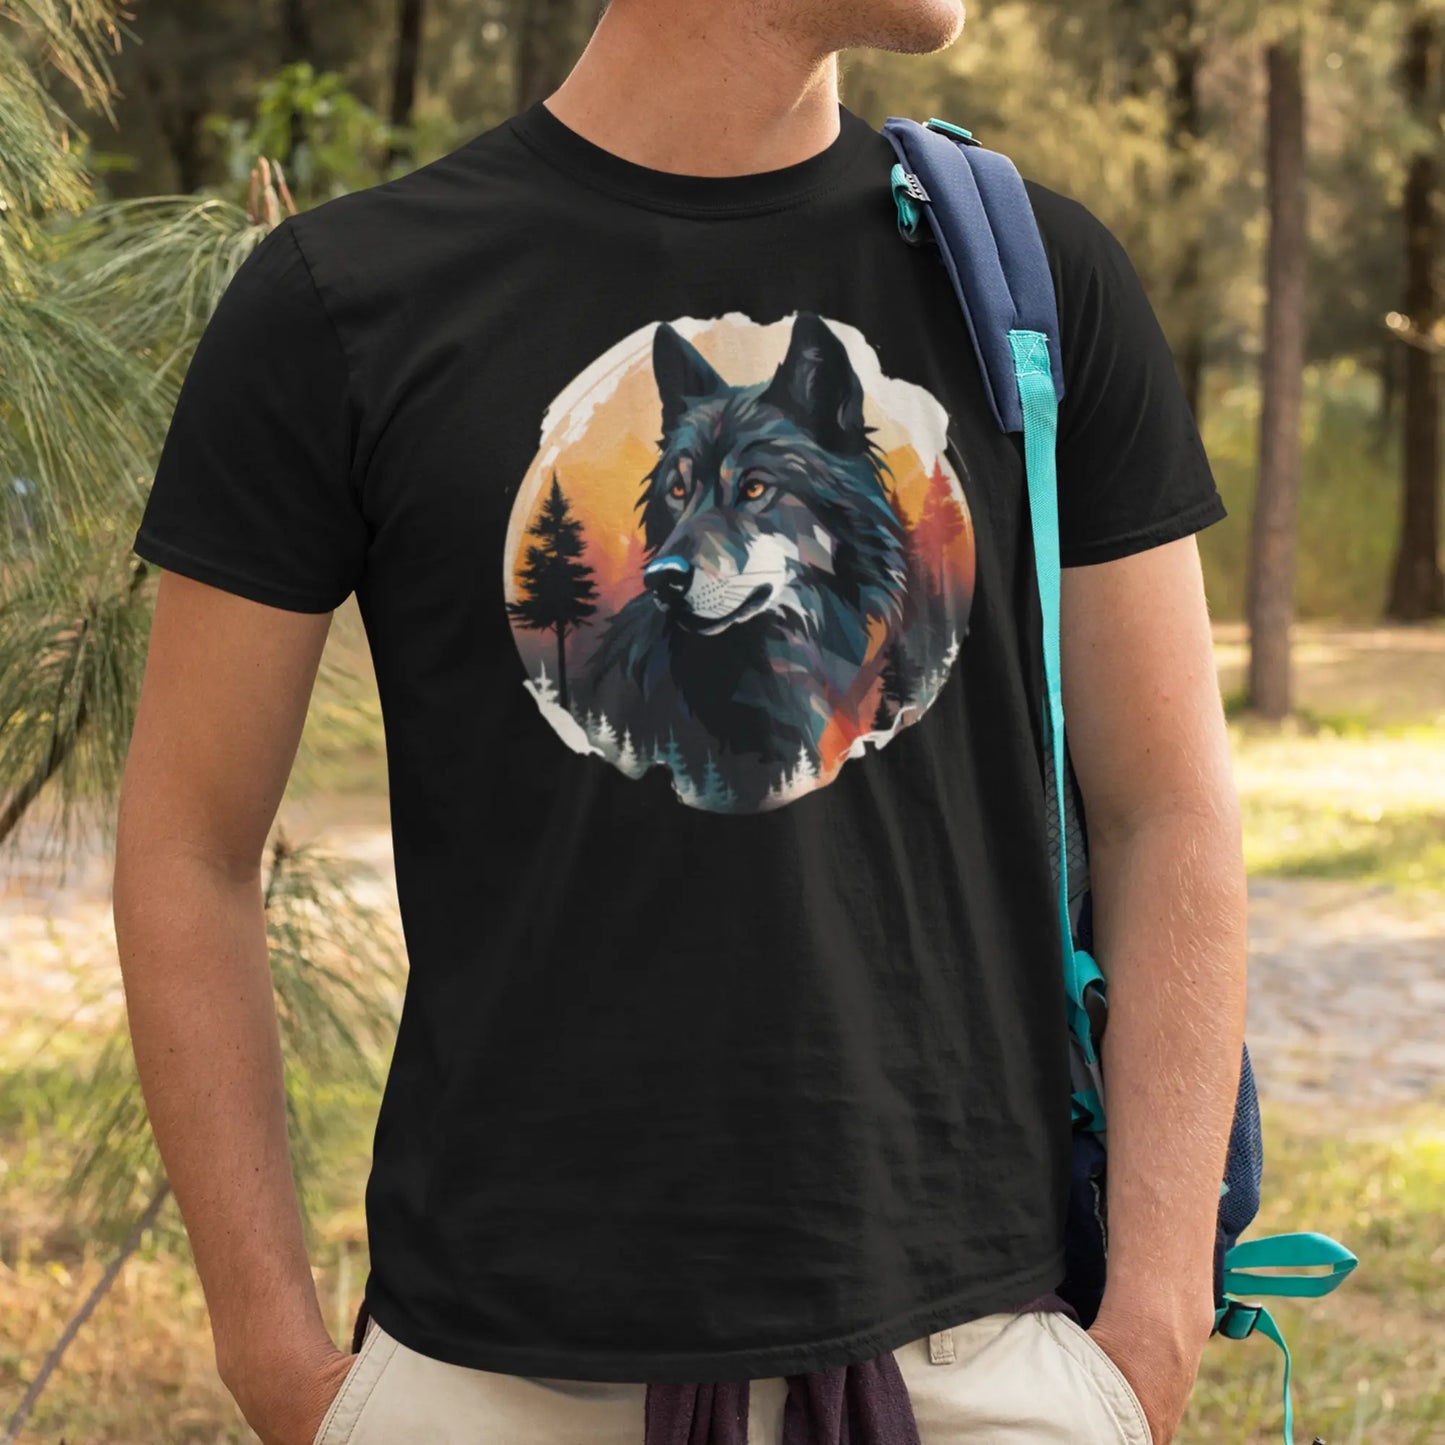 A man with a blue shoulder bag stands in a forested area, wearing a black t-shirt featuring a large, colorful graphic of a wolf's head. The graphic is styled with warm autumnal hues in the background, with the wolf's gaze appearing noble and serene.